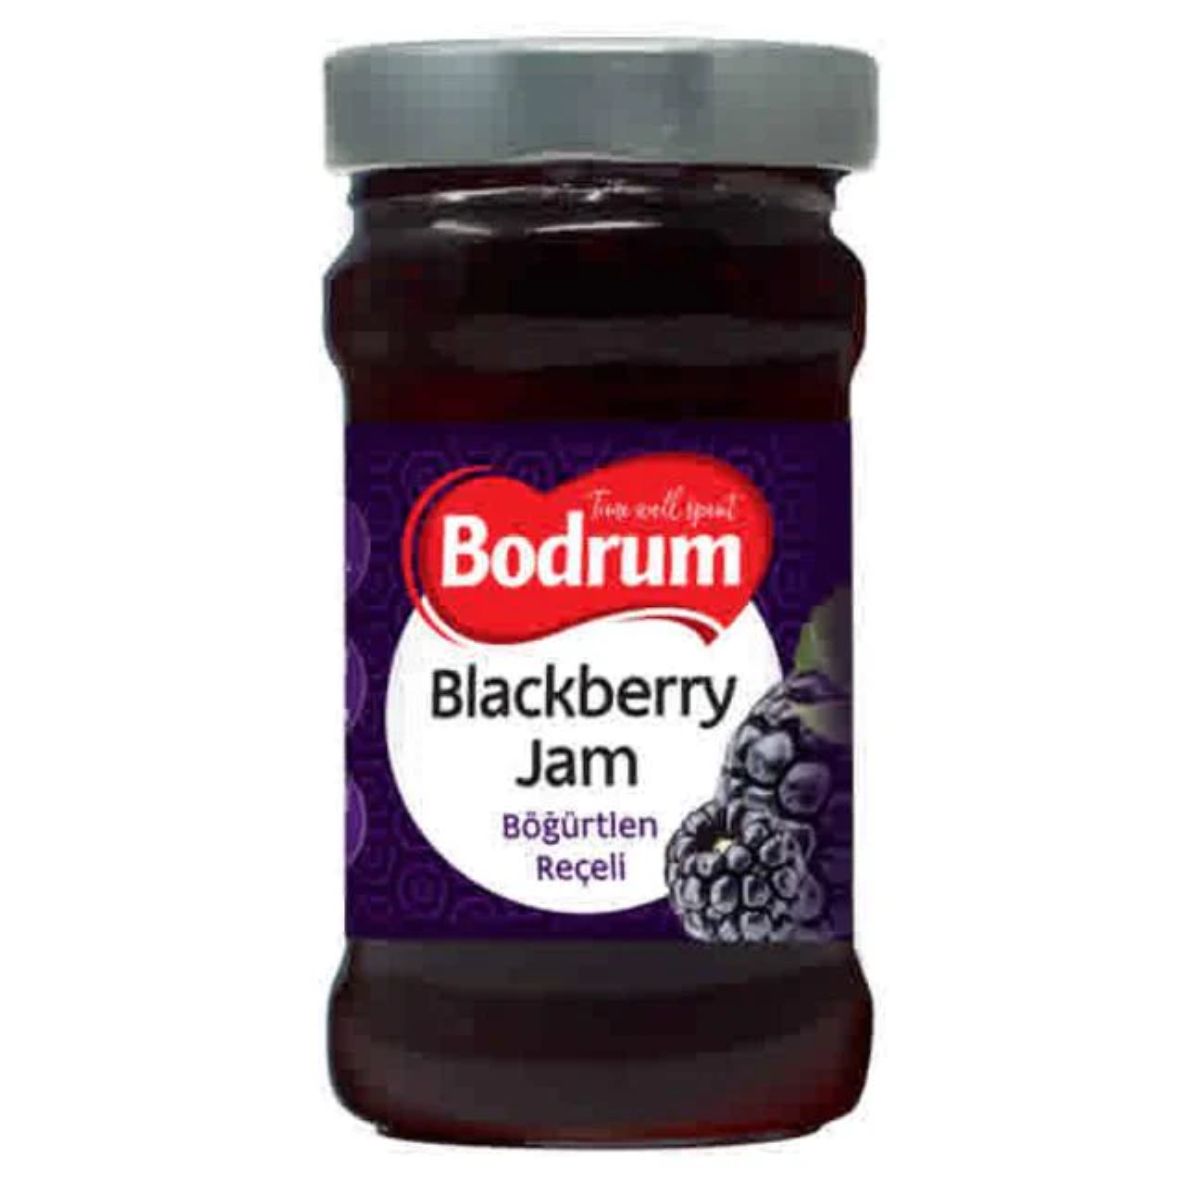 A jar of Bodrum Blackberry Jam with a label.